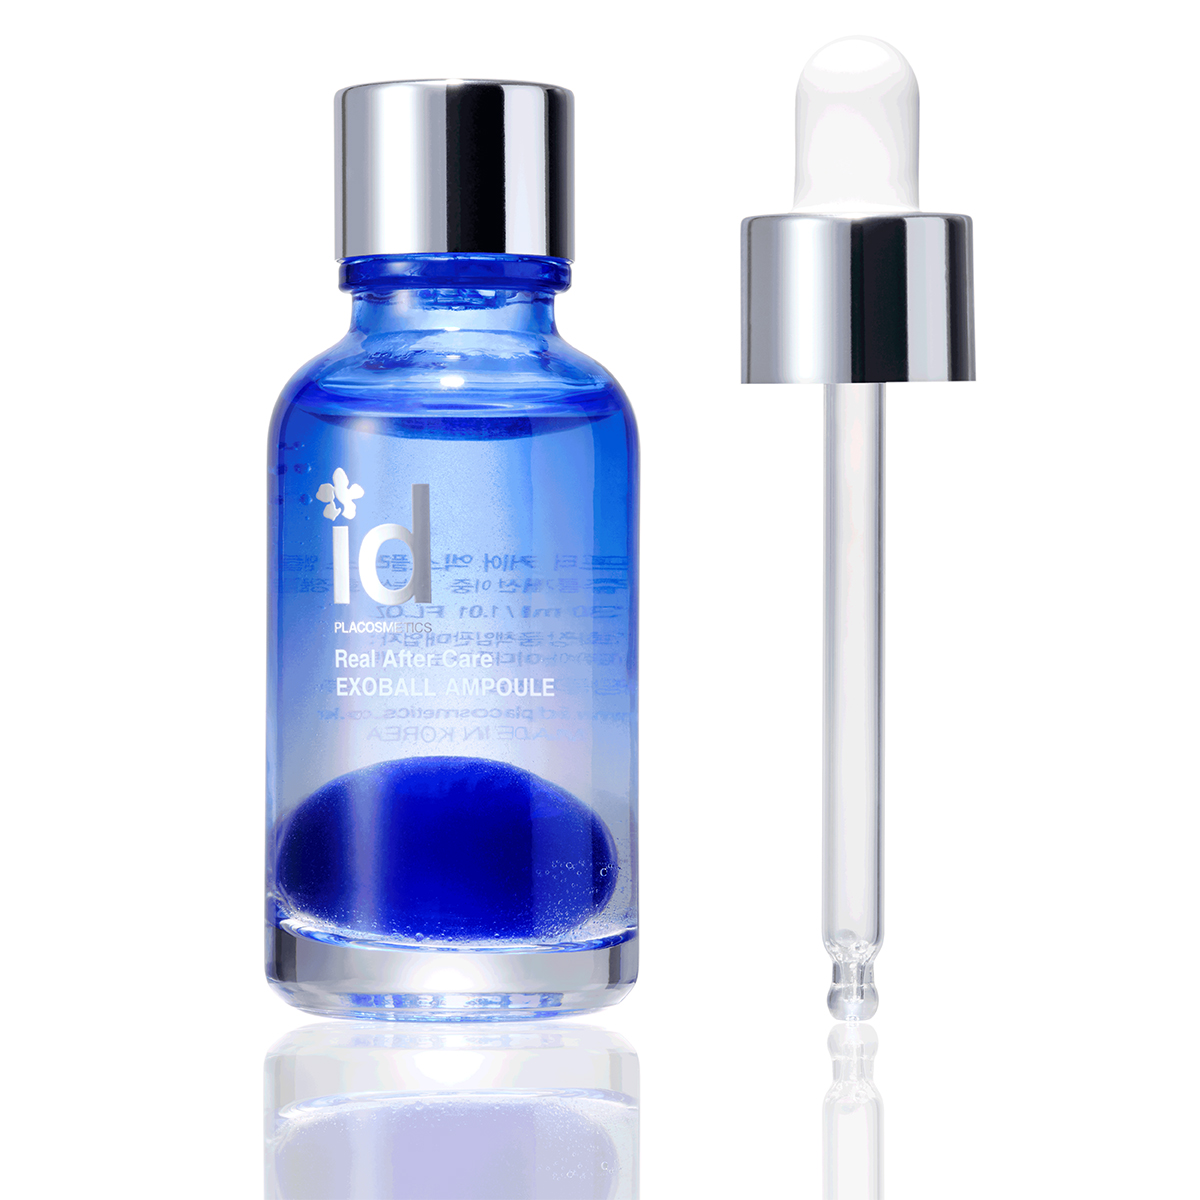 ID REAL AFTER CARE EXOPLUS AMPOULE